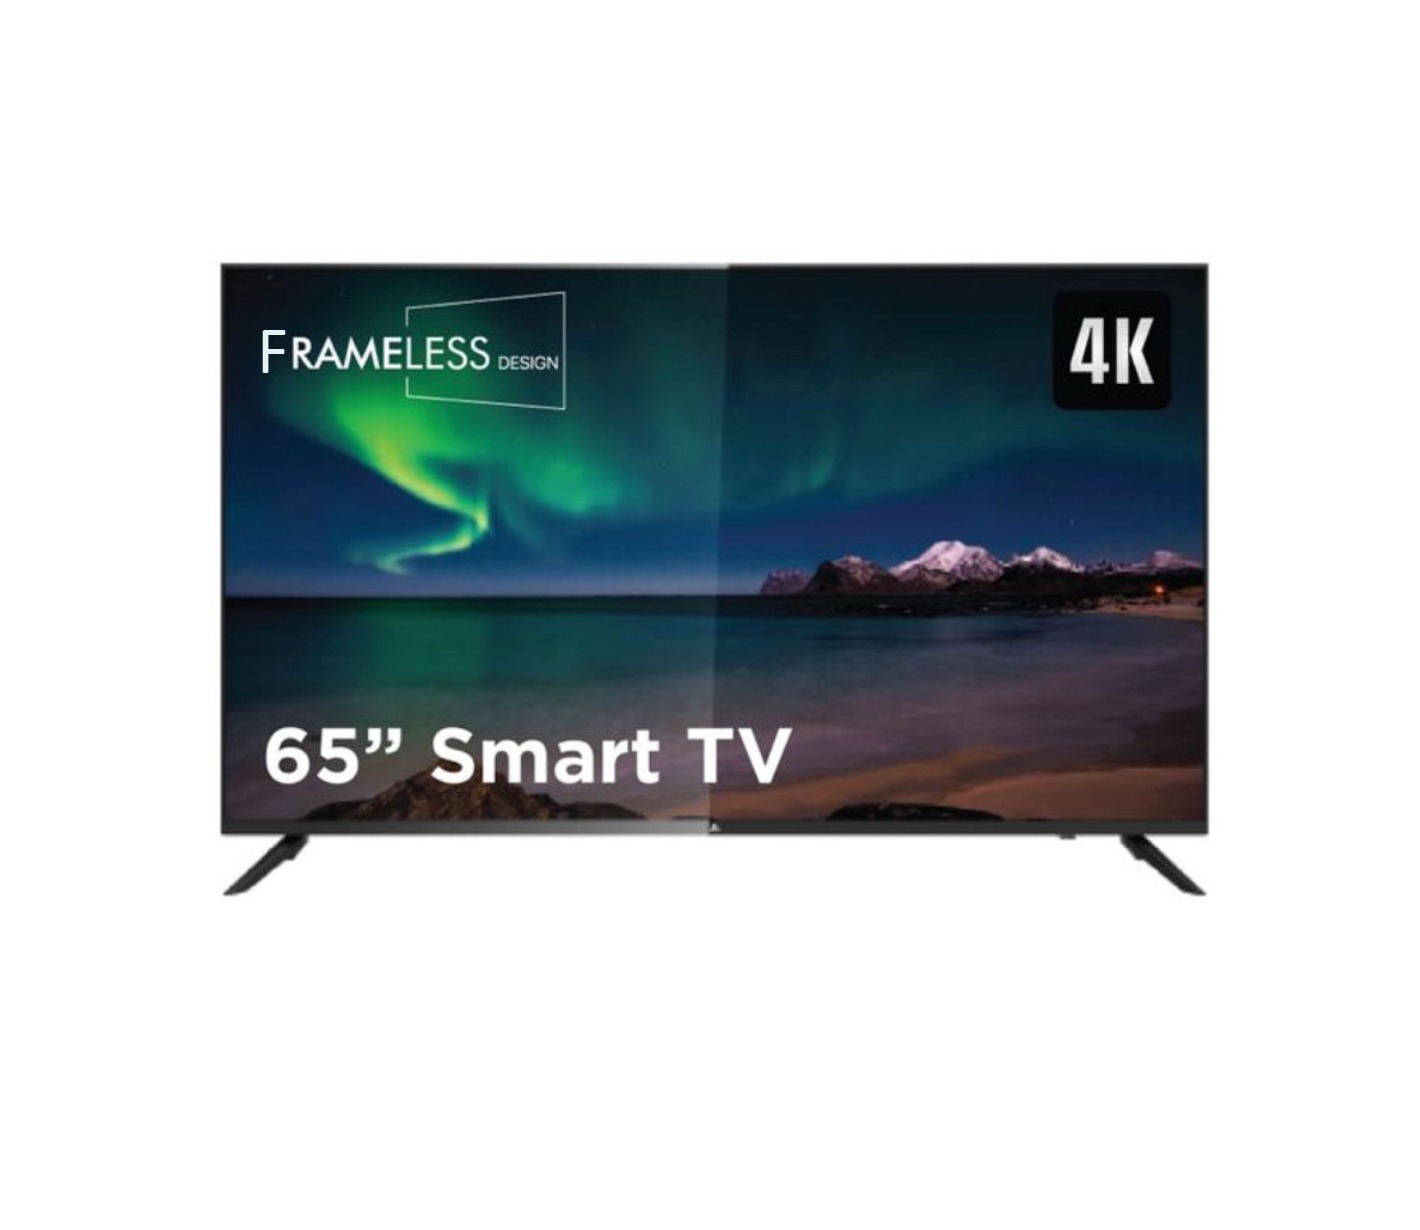 Ateam TV 65-Inch, AK Smart LED With Built IN DVB-T2 Receiver 1.5GB, 8GB, Android 9.0, 65AT8200